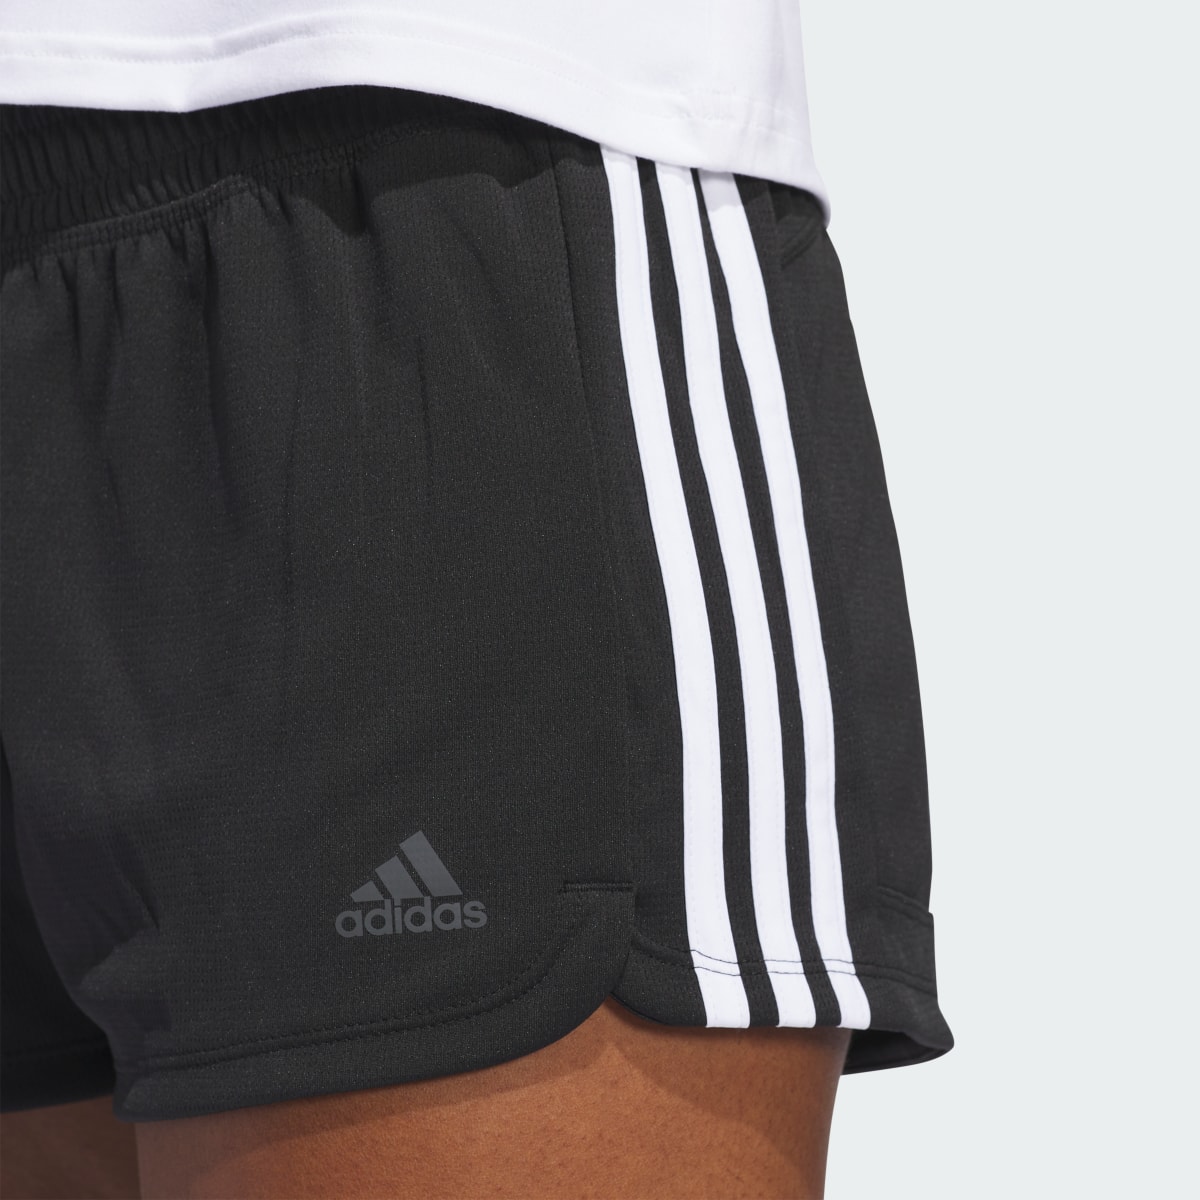 Adidas Short Pacer 3-Stripes Knit. 6